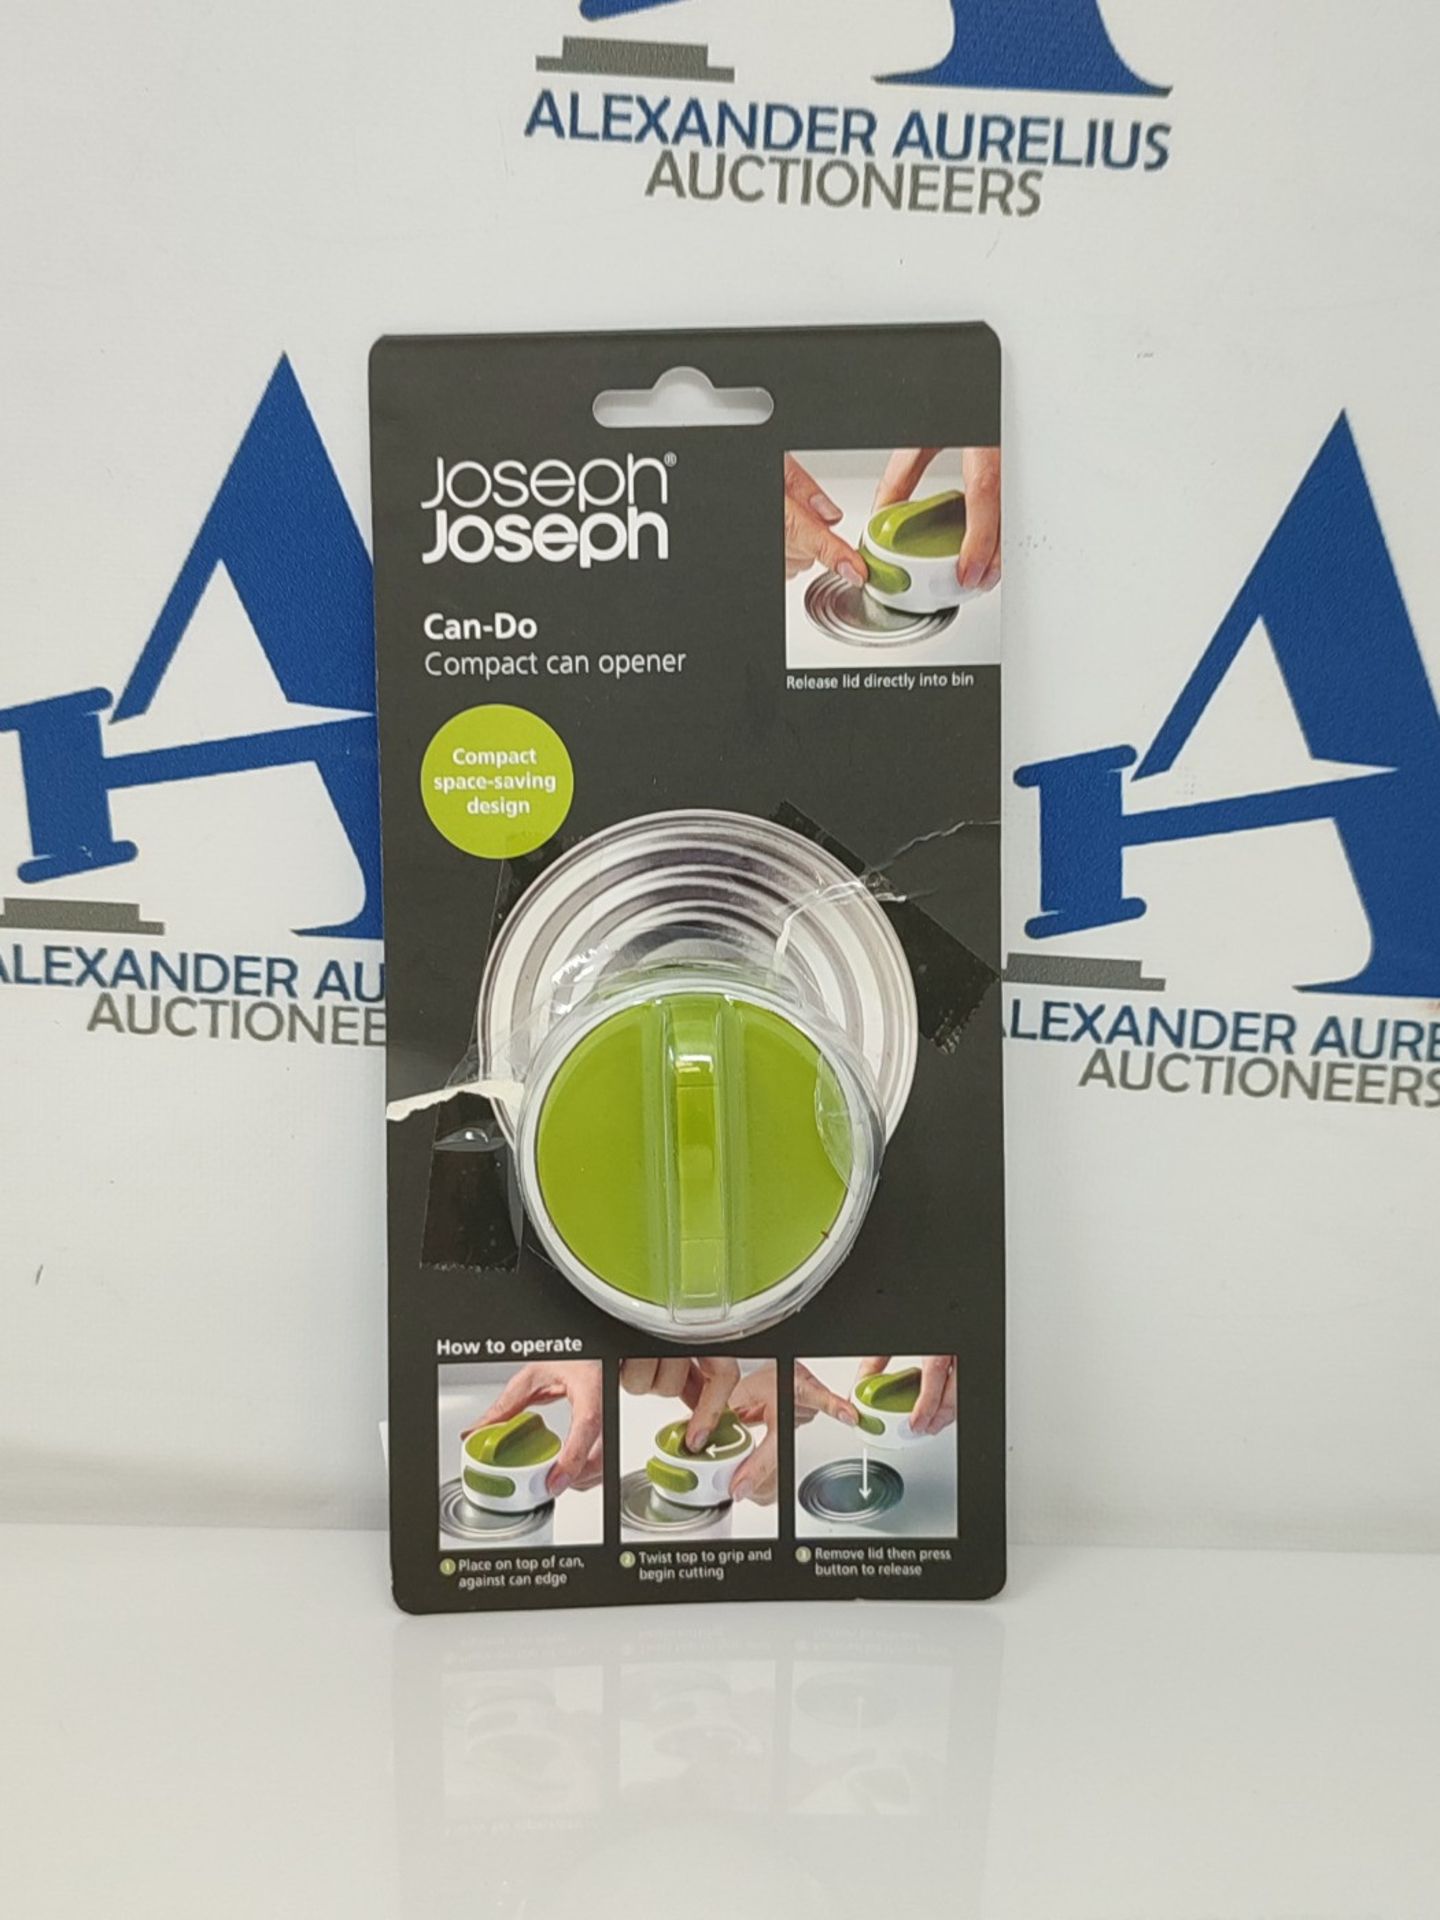 Joseph Joseph 20005 Can-Do Compact Can Opener - White/Green, Small - Image 2 of 3